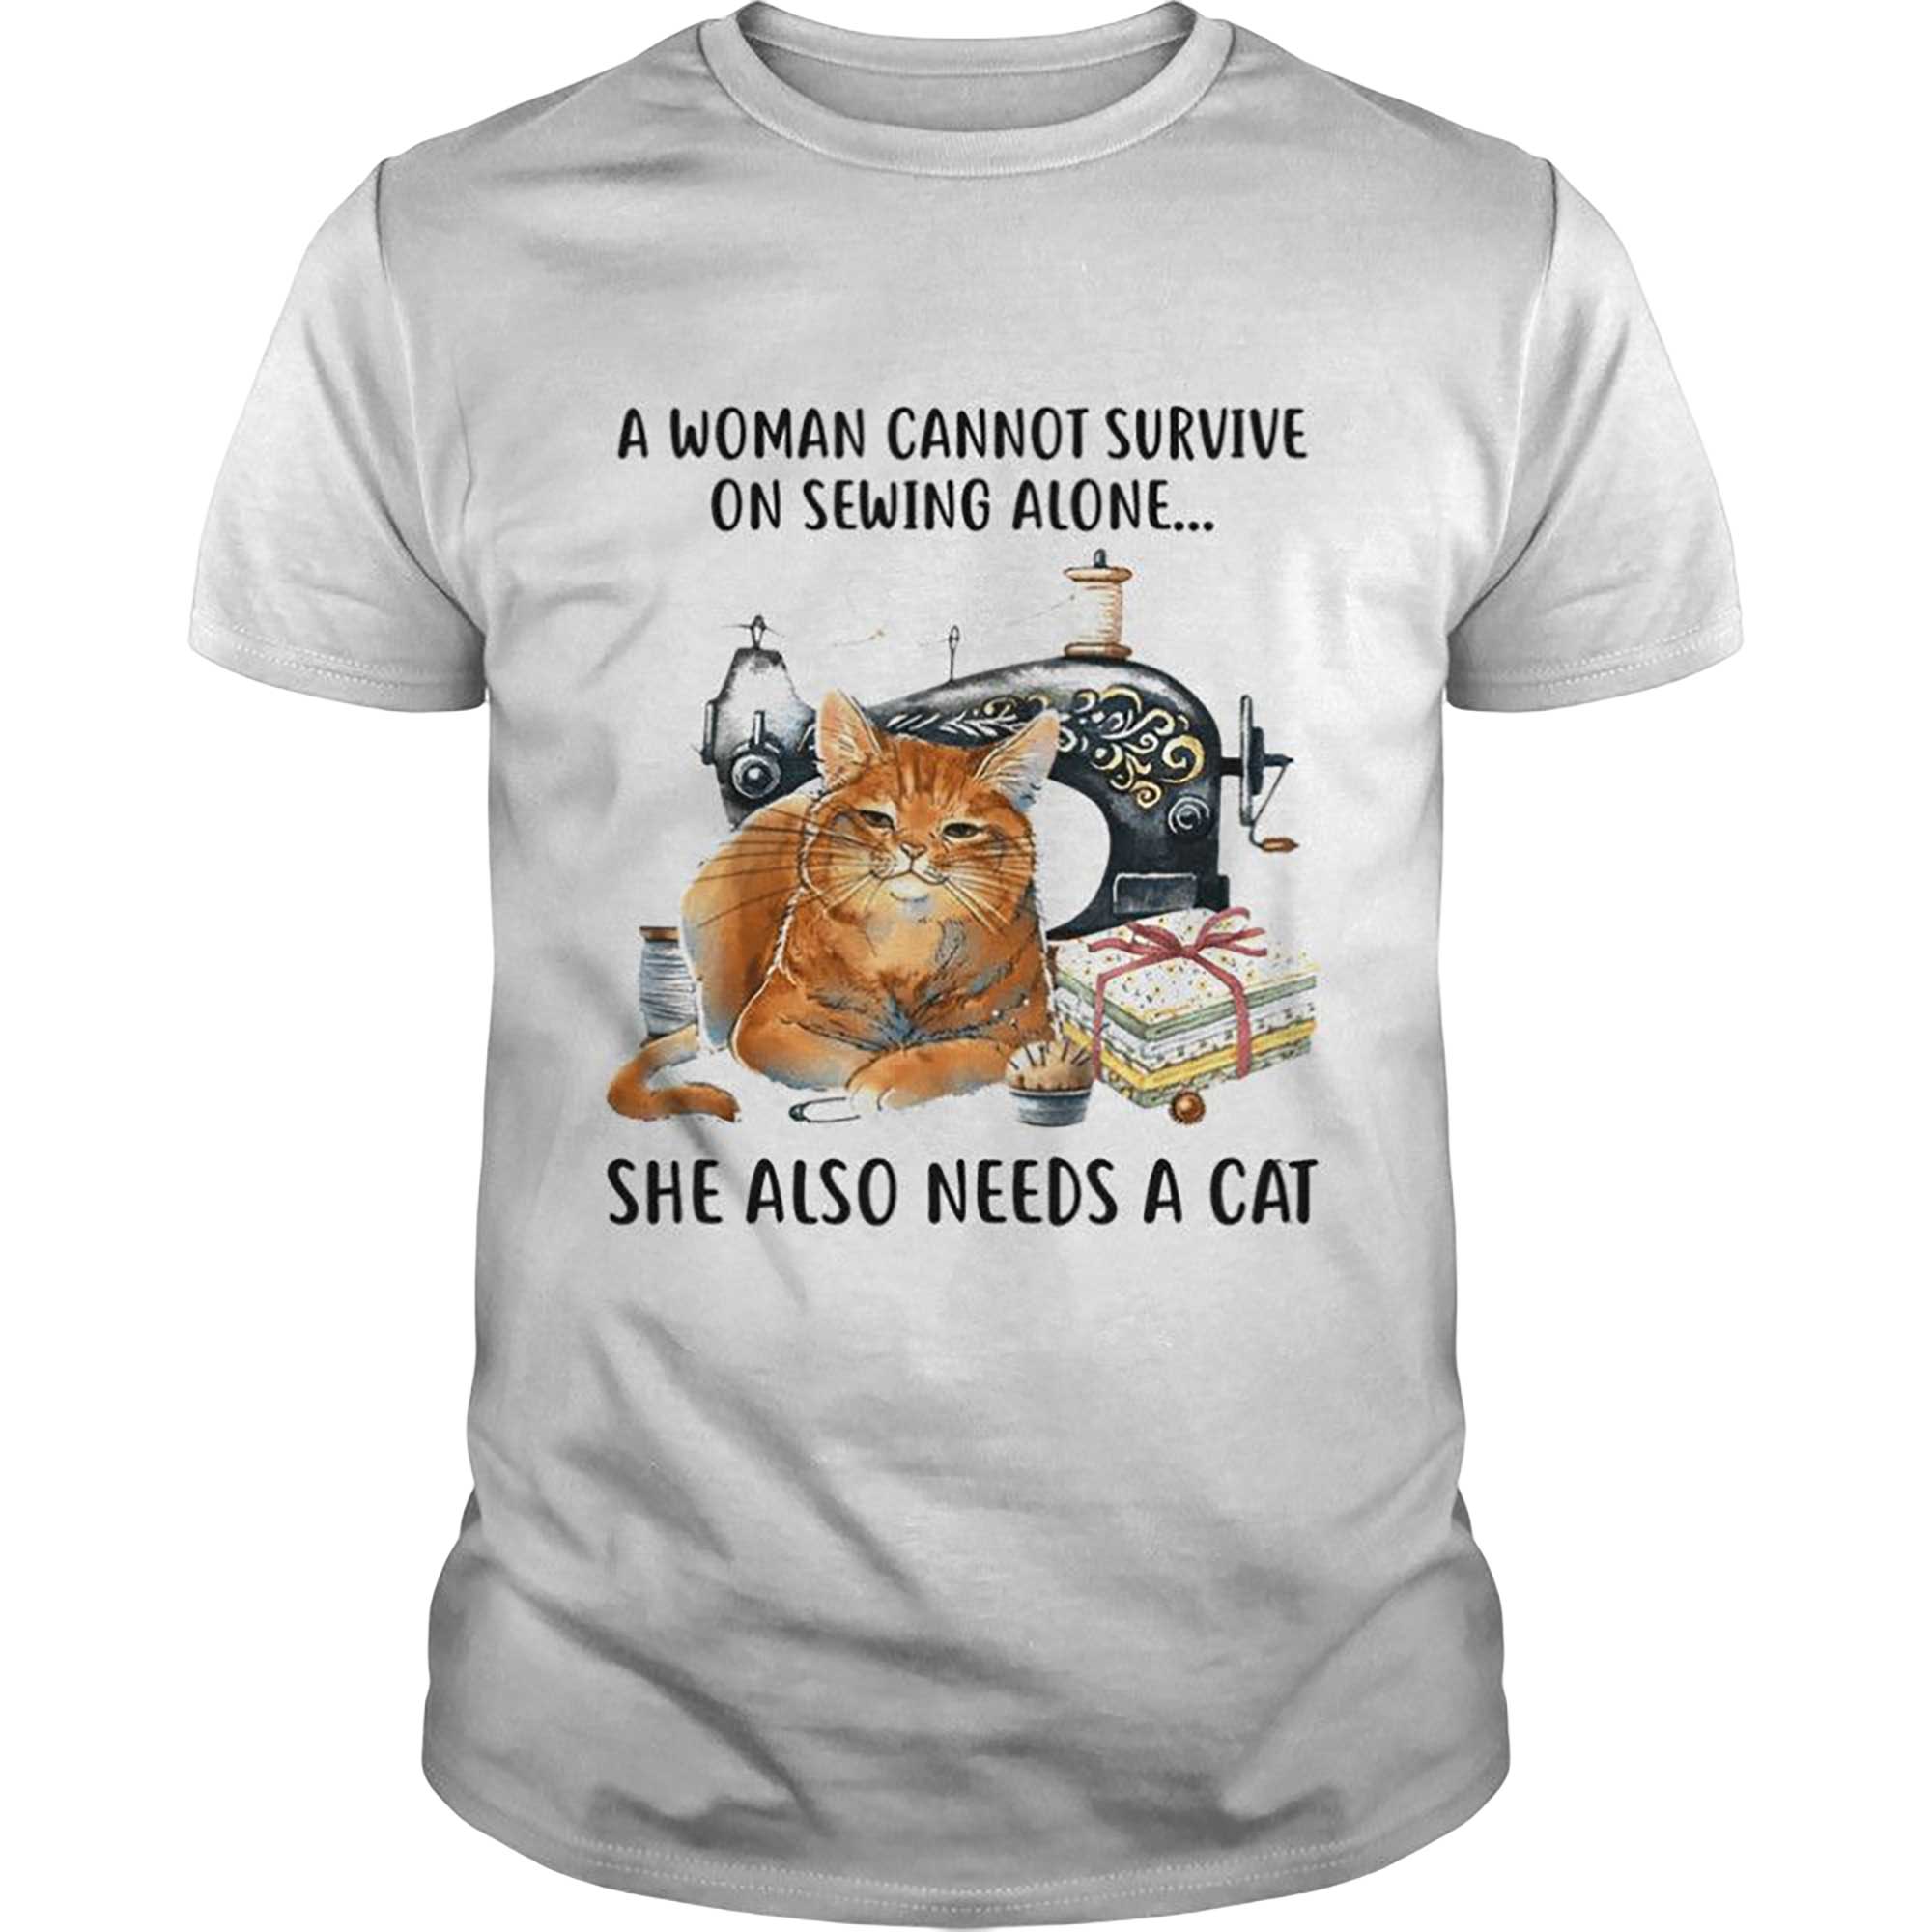 Skitongift-A-Cannot-Survive-On-Sewing-Alone-She-Also-Needs-A-Cat-Shirt-Funny-Shirts-Hoodie-Sweater-Short-Sleeve-Casual-Shirt